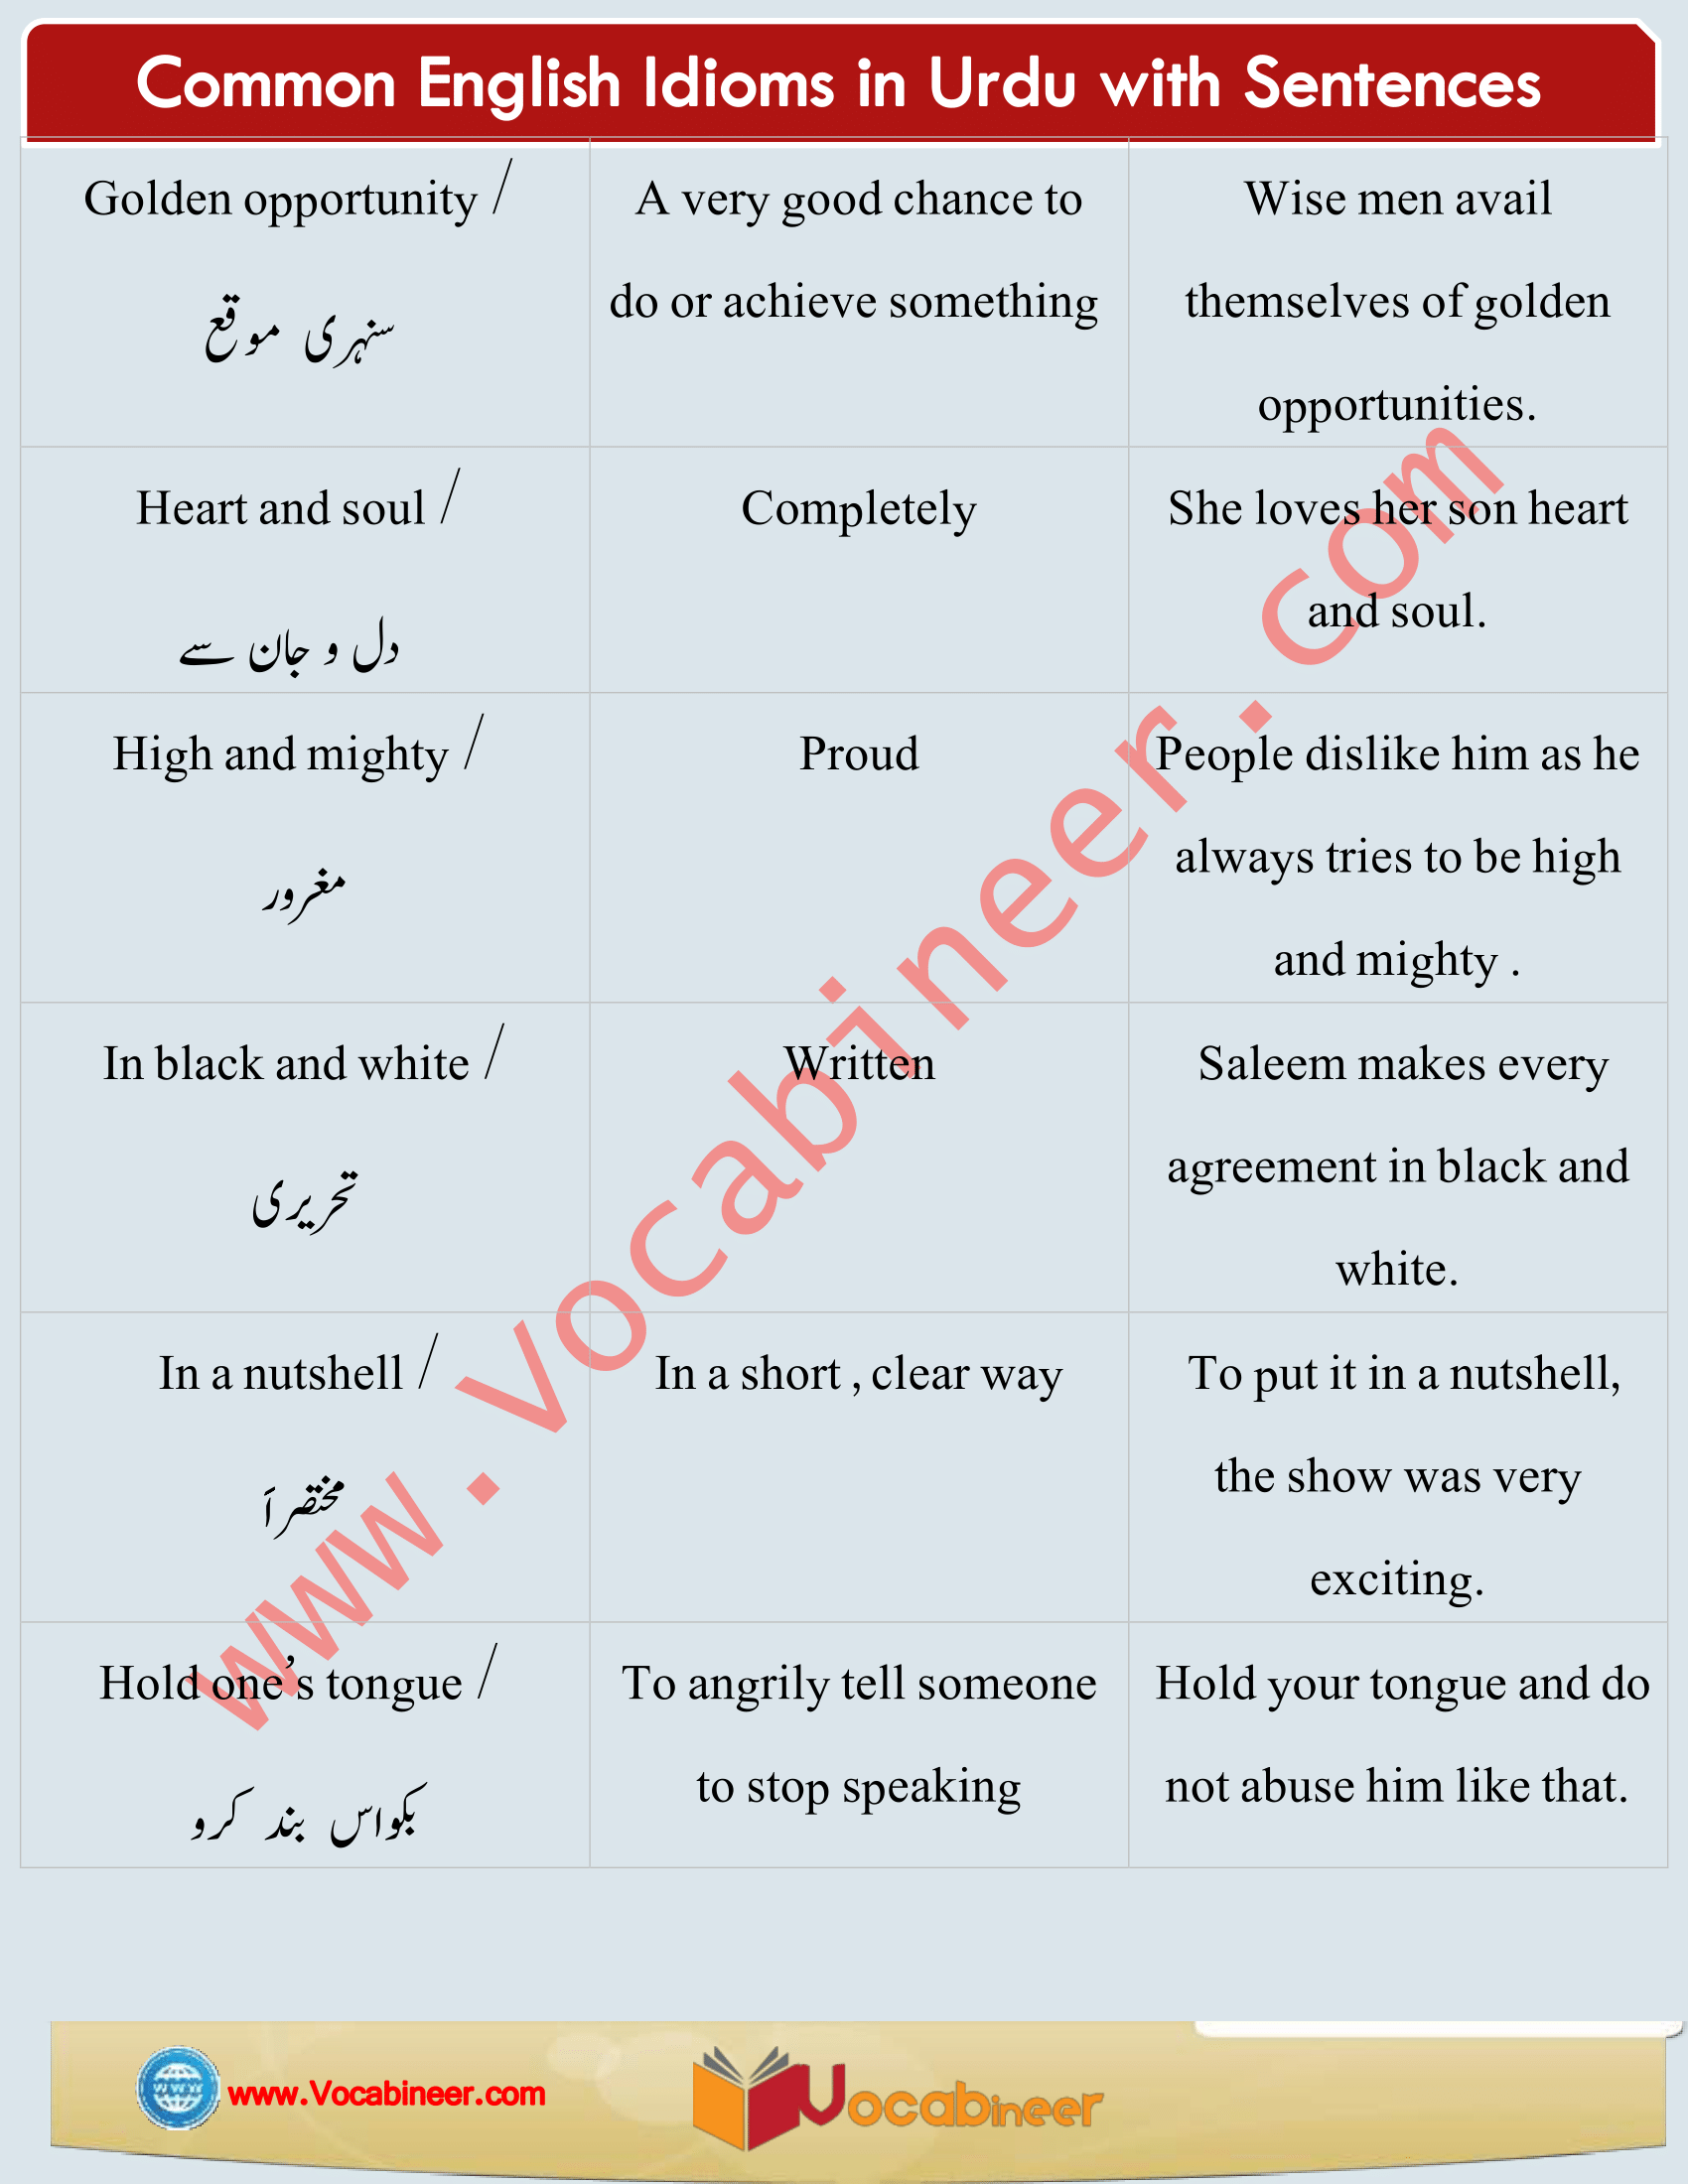 Common English Idioms in Urdu / Hindi, Daily used Idioms with Urdu / Hindi, English Idioms in Urdu, 50 English Idioms in Urdu with sentences, English Idioms we use in daily life, English to Urdu Idioms, Everyday used English Idioms, Most common English Idioms, Daily life English Idioms, 1000 Most common English Idioms, Idioms with sentences, English idioms in Urdu PDF, Download English idioms in PDF, English Idioms with meanings and sentences PDF, Essential Idioms in English PDF, English Idioms in use PDF, American English Idioms with Urdu Hindi meanings, English Idioms with Urdu meanings, Most important English Idioms with sentences, Learn English Idioms through Hindi Urdu, Idioms with Hindi Urdu meanings, Daily used English Idioms with meanings, Spoken English practice, Learn Vocabulary in Urdu.www.vocabineer.com